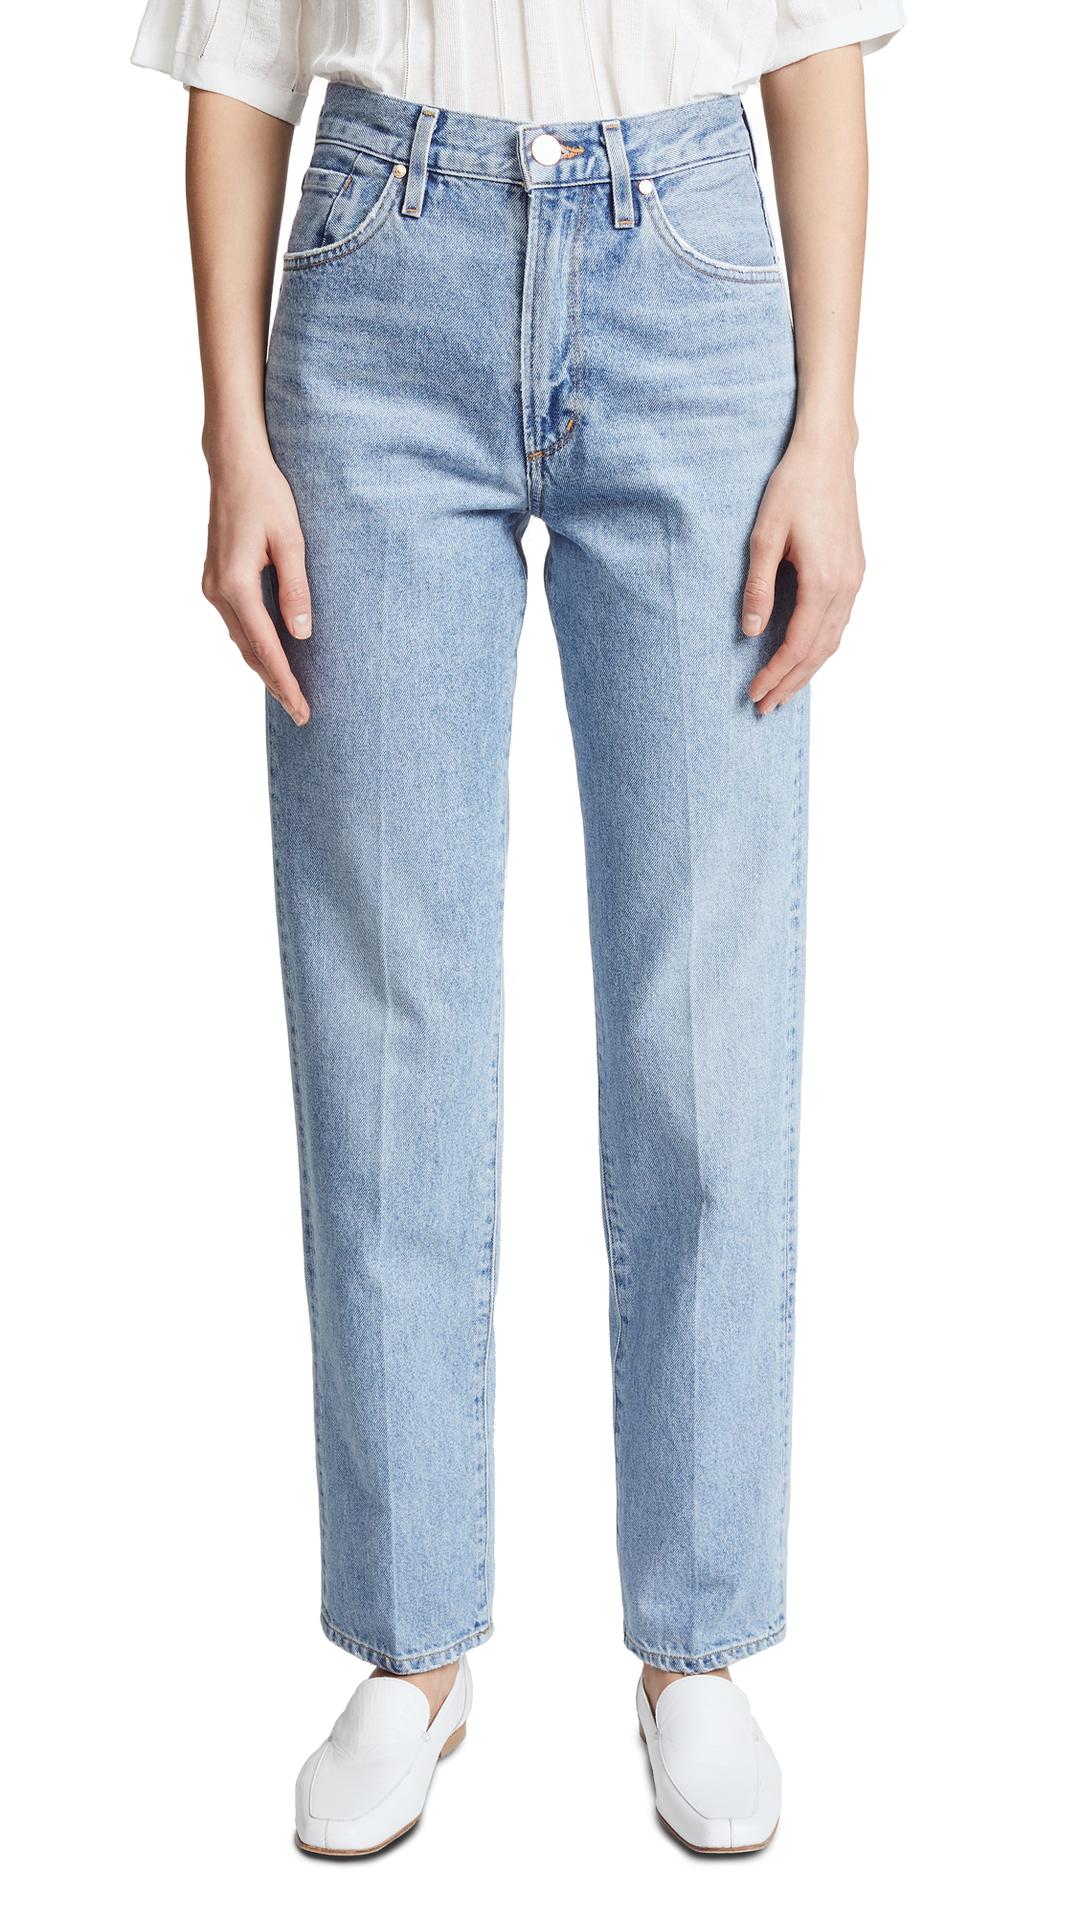 dad jeans trend